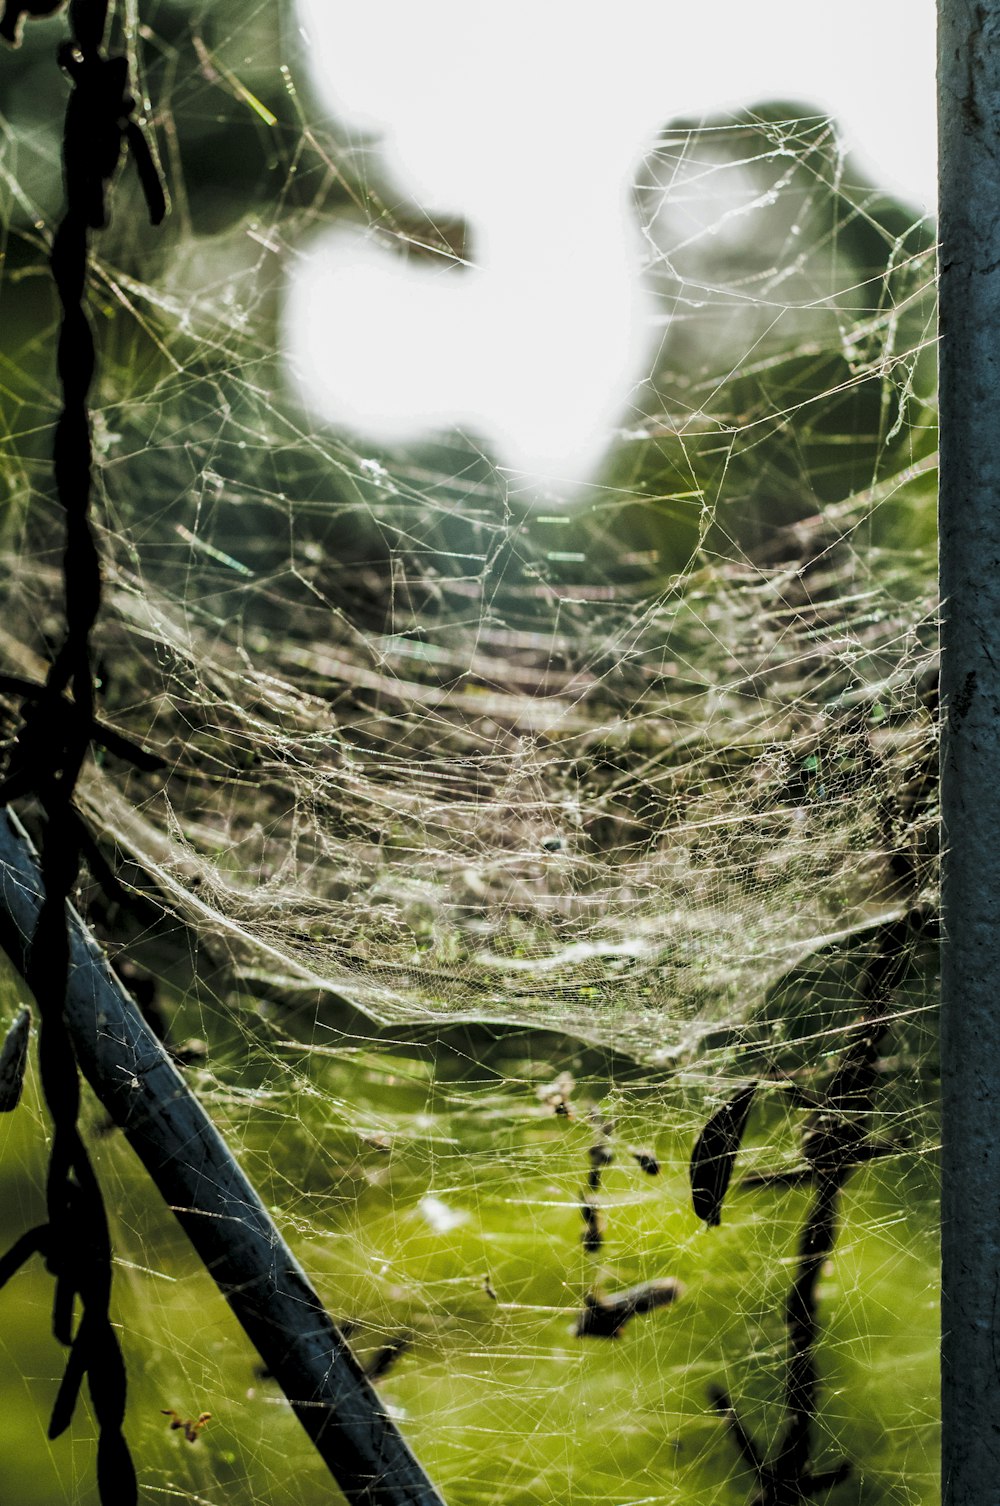 a spider web hanging from a metal pole